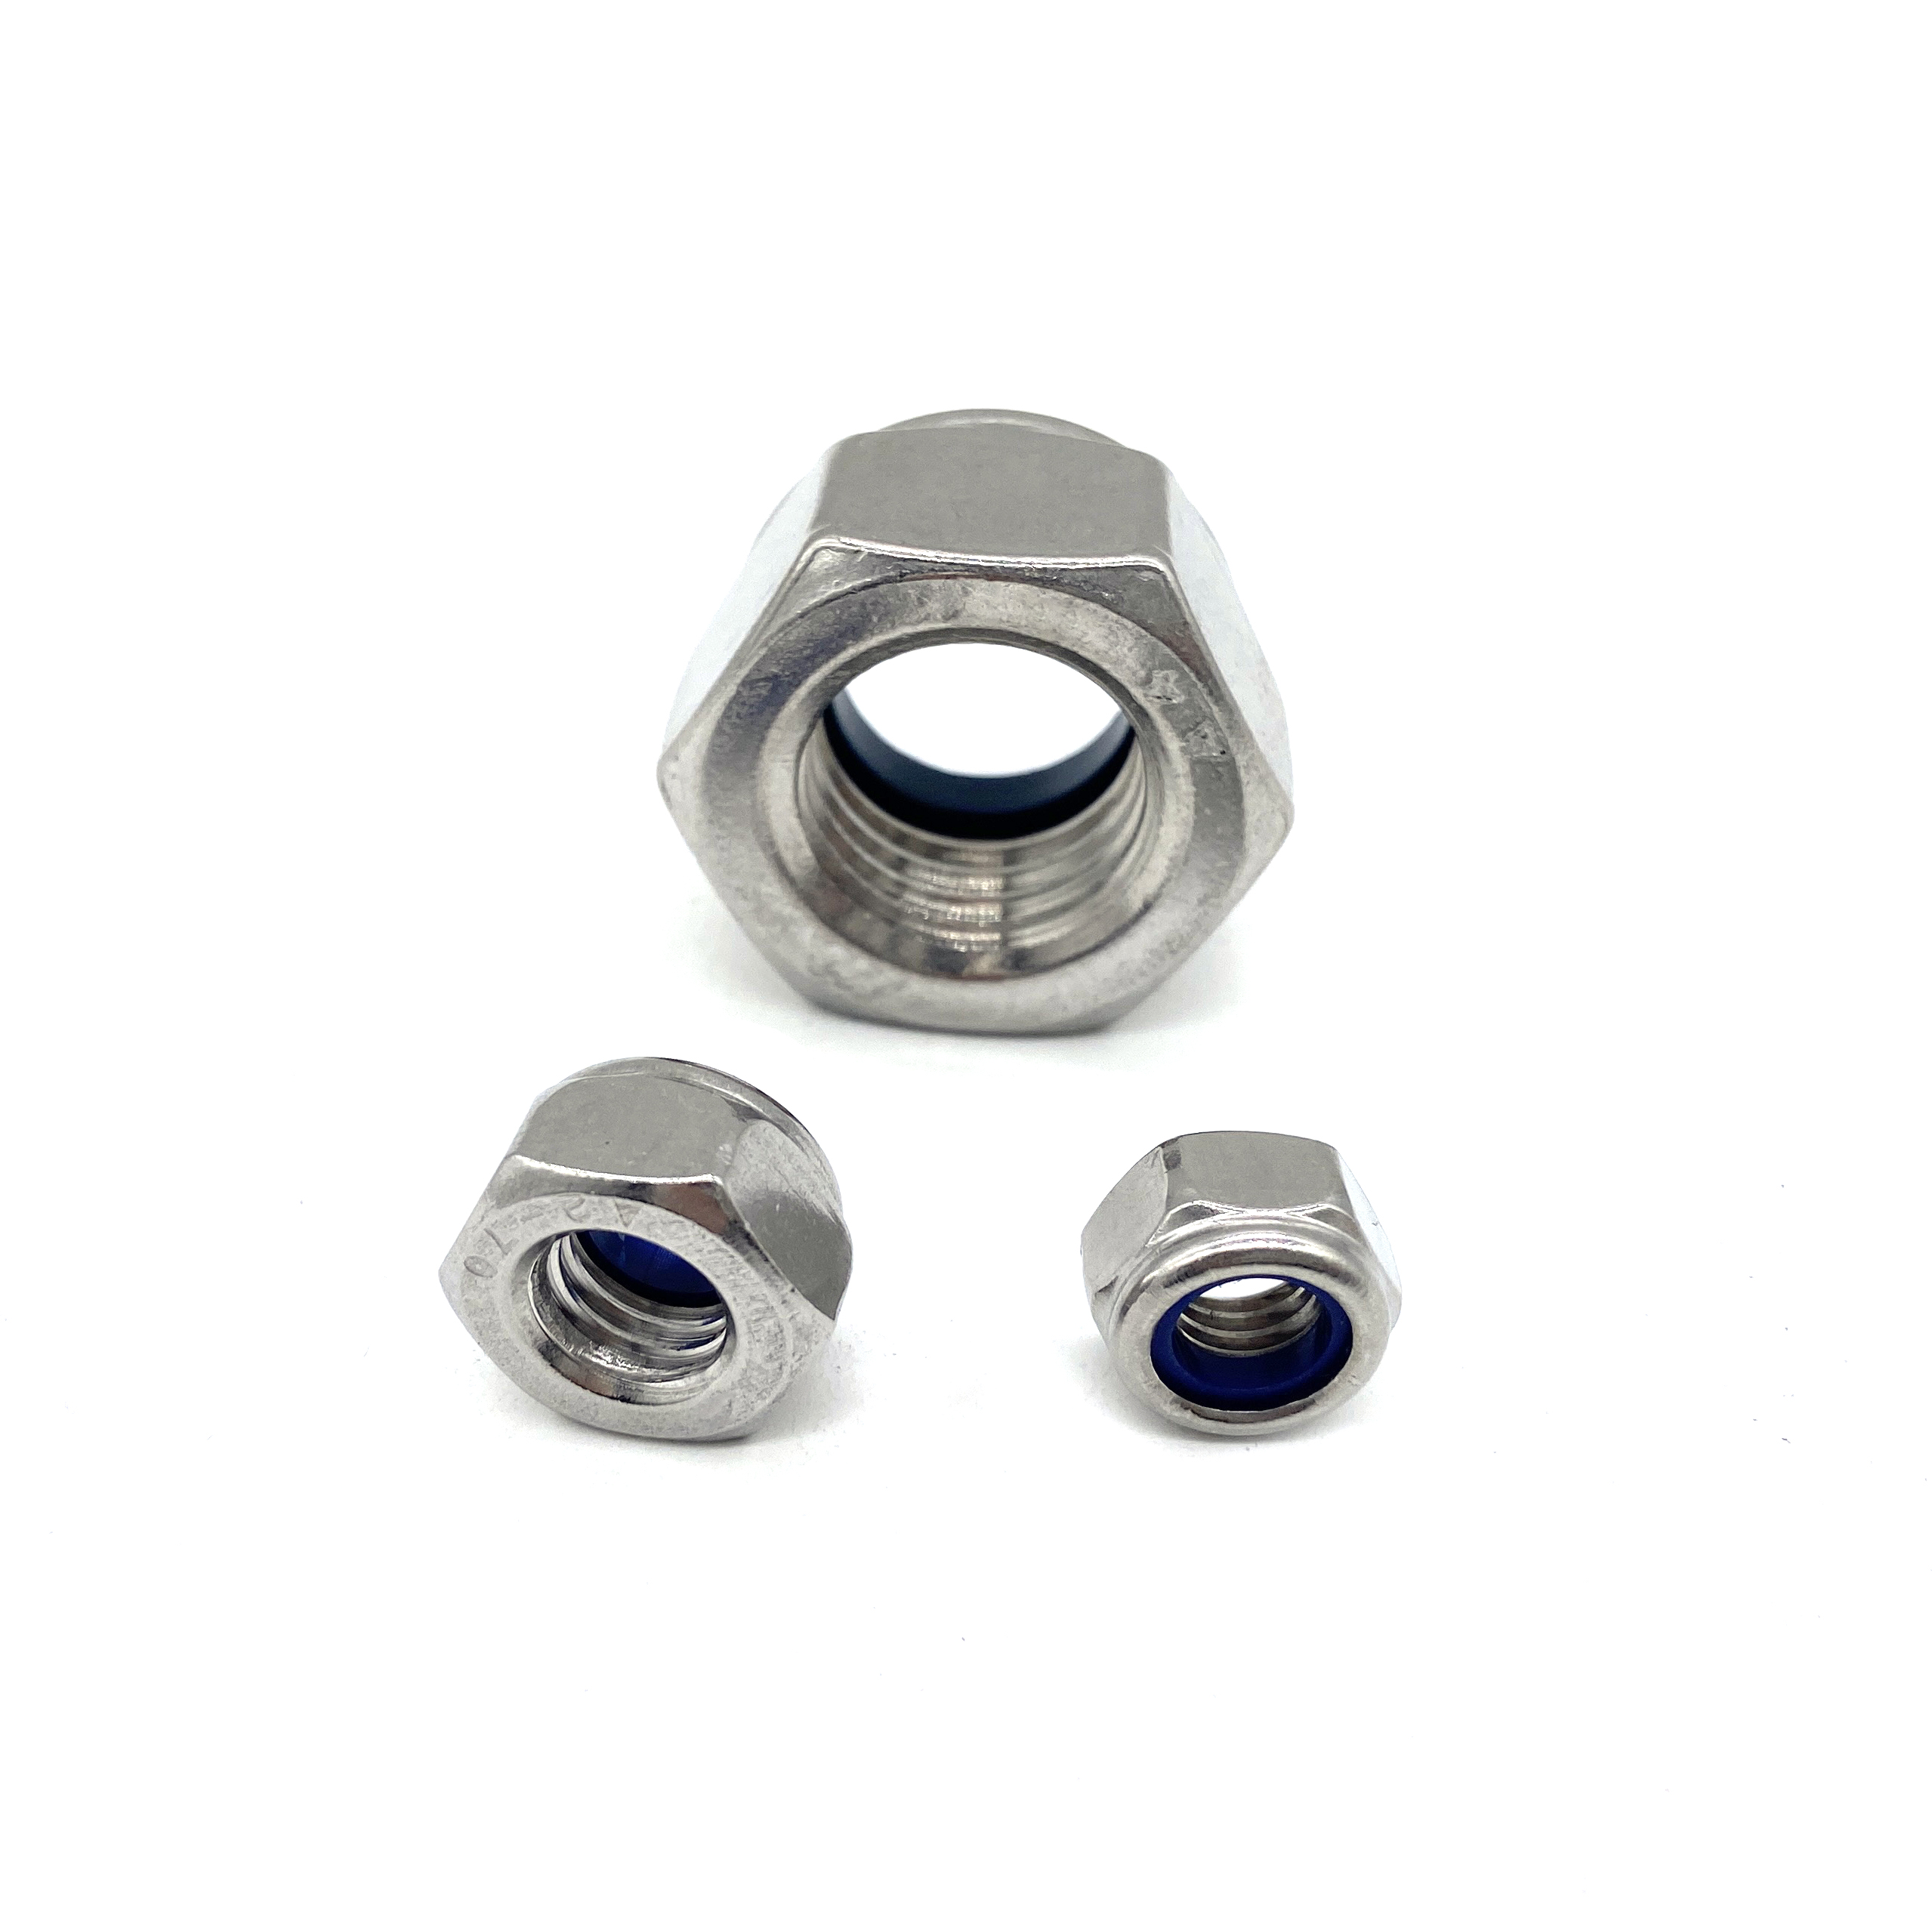 Half Nut A4 Marine Grade Stainless Steel Pack of 5